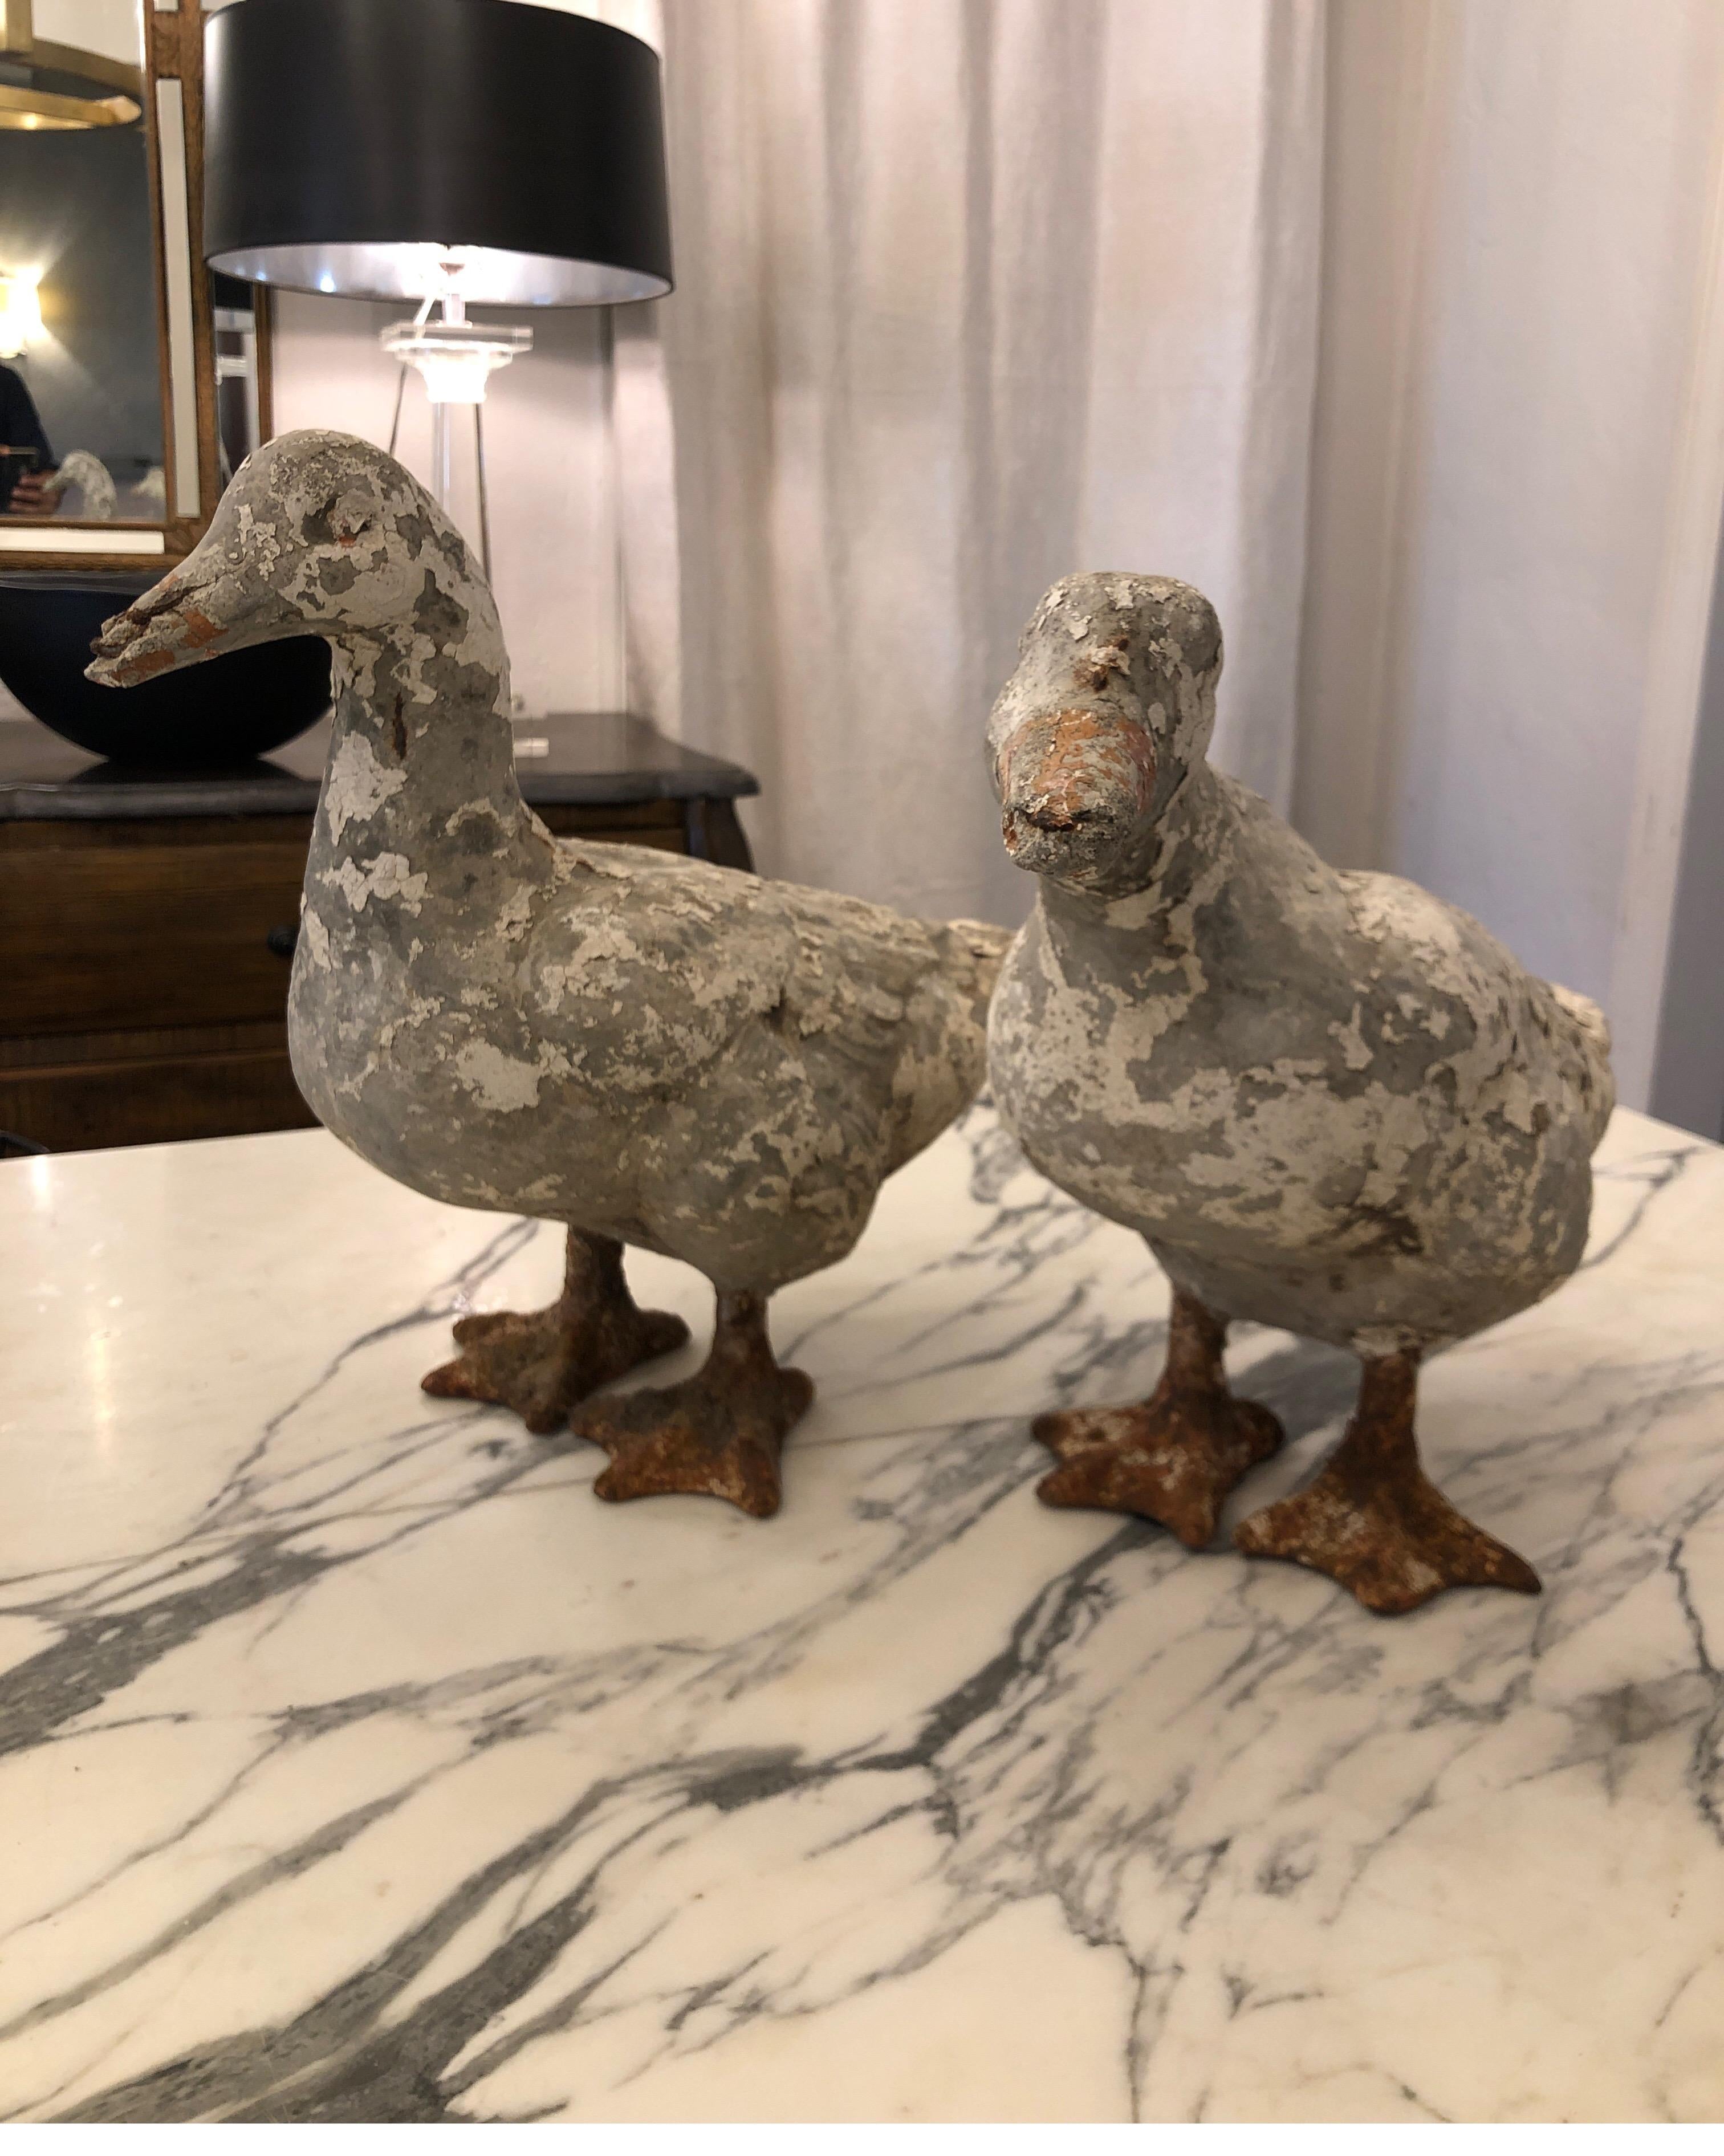 Life-size pair of carved stone duck sculptures with iron webbed feet.
One depicts a duck standing with his neck stretched out and the other is in a natural standing position. Both are weathered with unique patina and rusty hues on the webbed